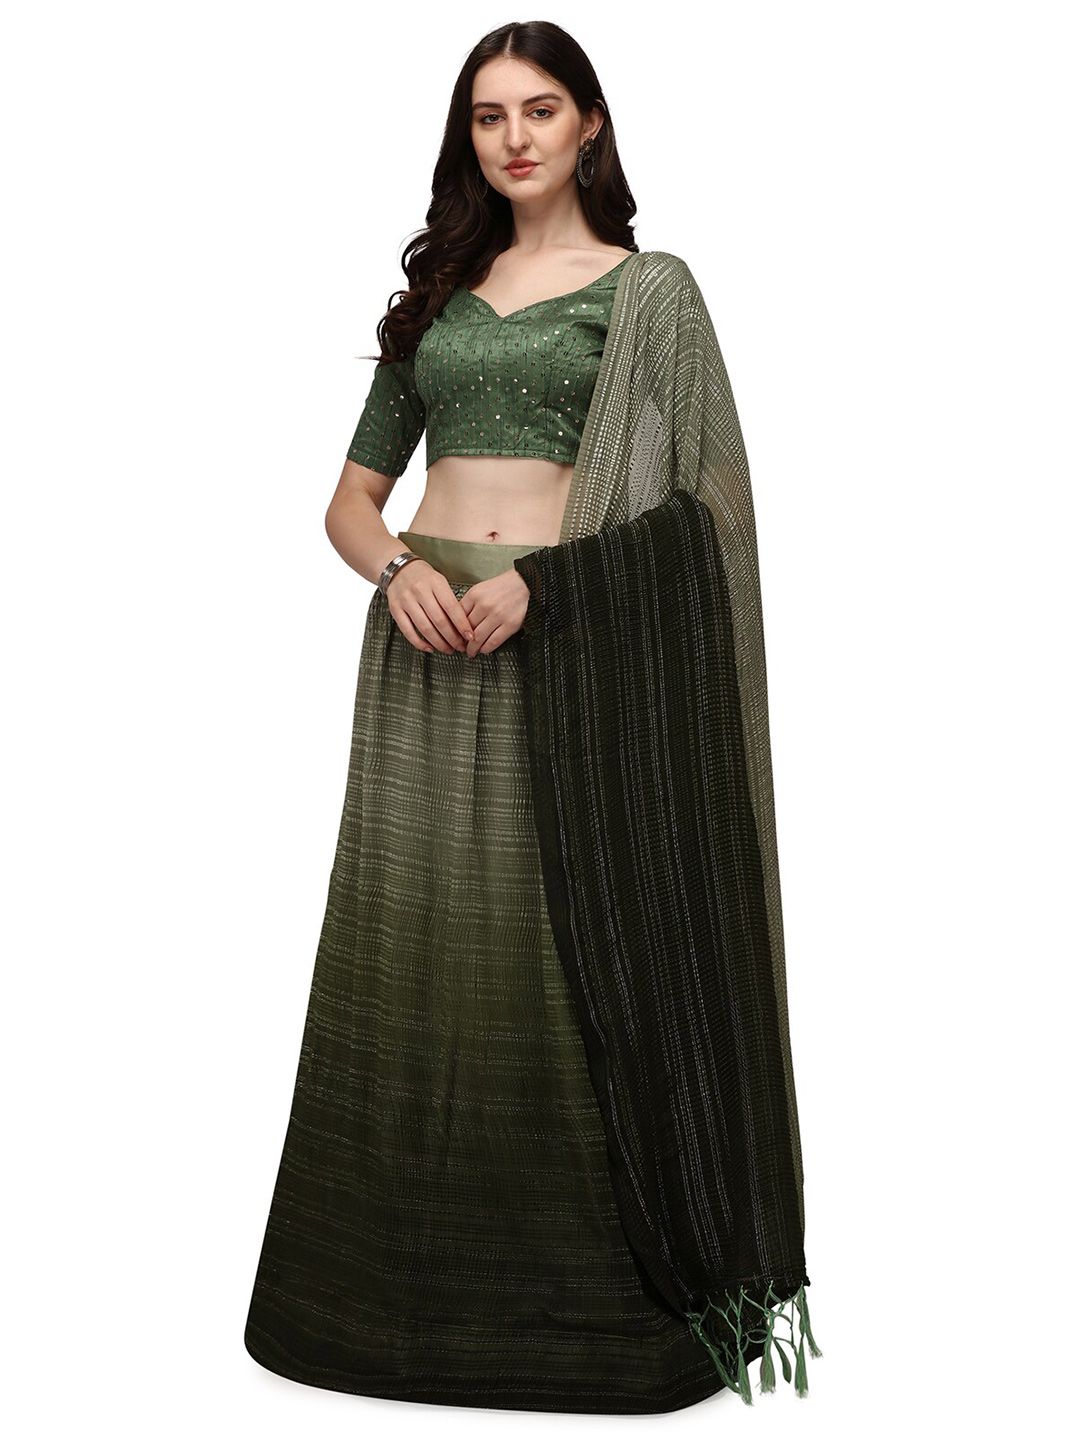 Pratham Blue Olive Green Embroidered Semi-Stitched Lehenga & Unstitched Blouse With Dupatta Price in India